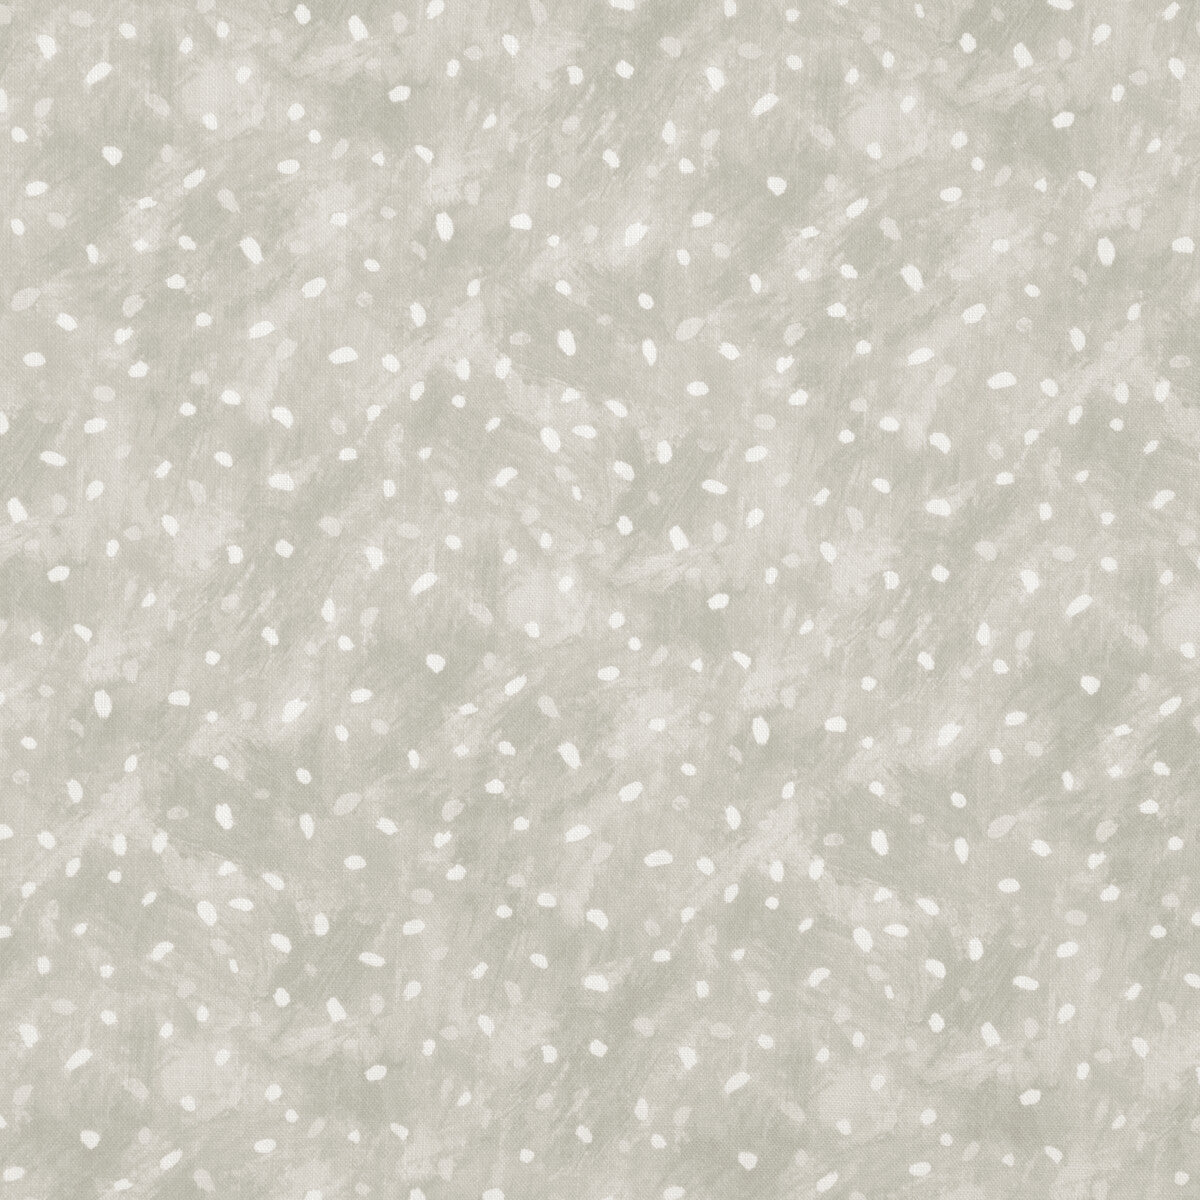 Starry Sky fabric in wheat color - pattern STARRY SKY.106.0 - by Kravet Basics in the Mid-Century Modern collection